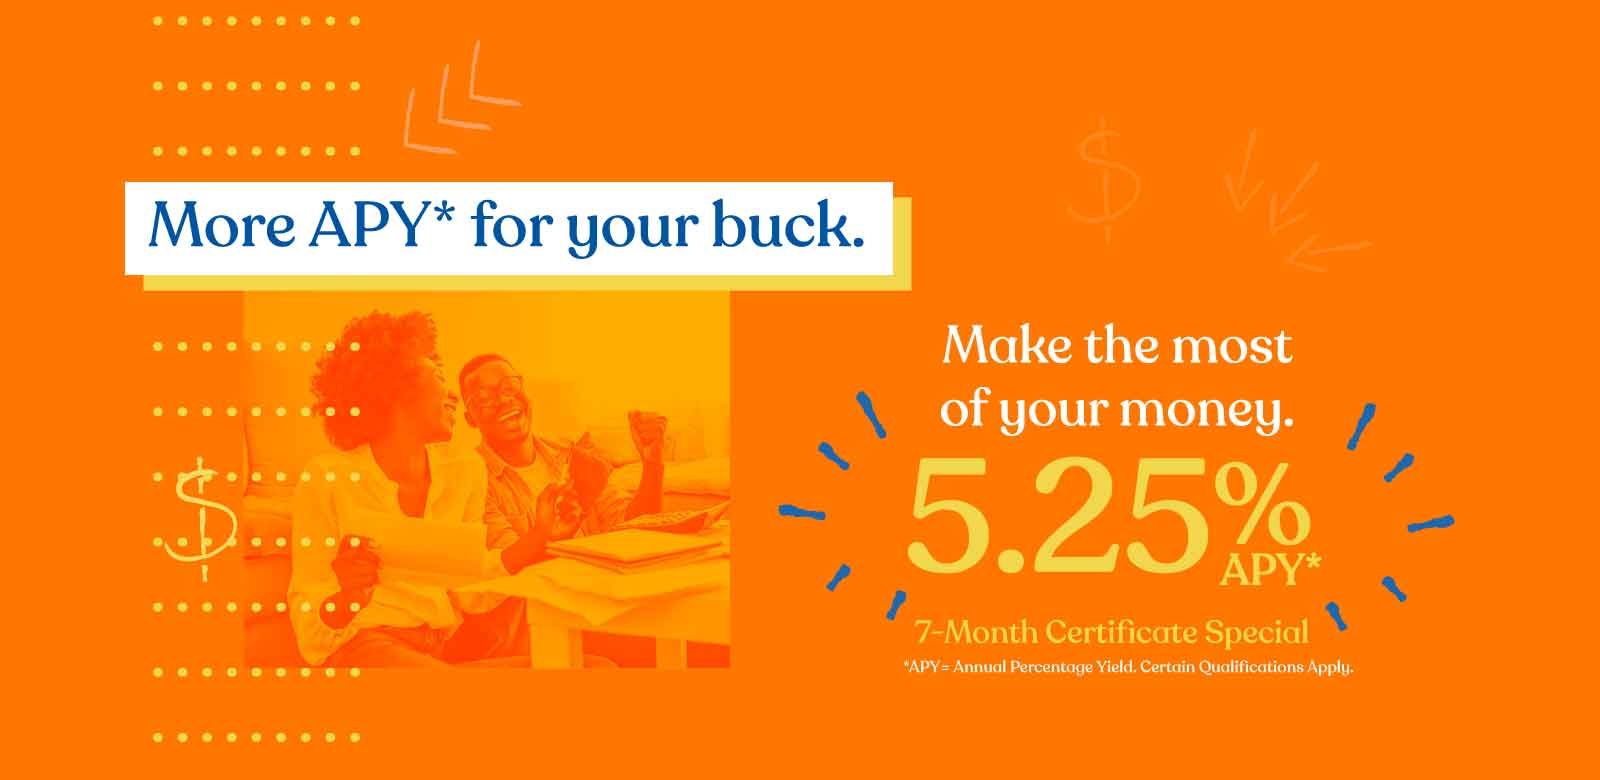 Happy People looking at their bank statement, More APY* for your buck with 5.25% APY*. APY= Annual Percentage Rate. Learn More.